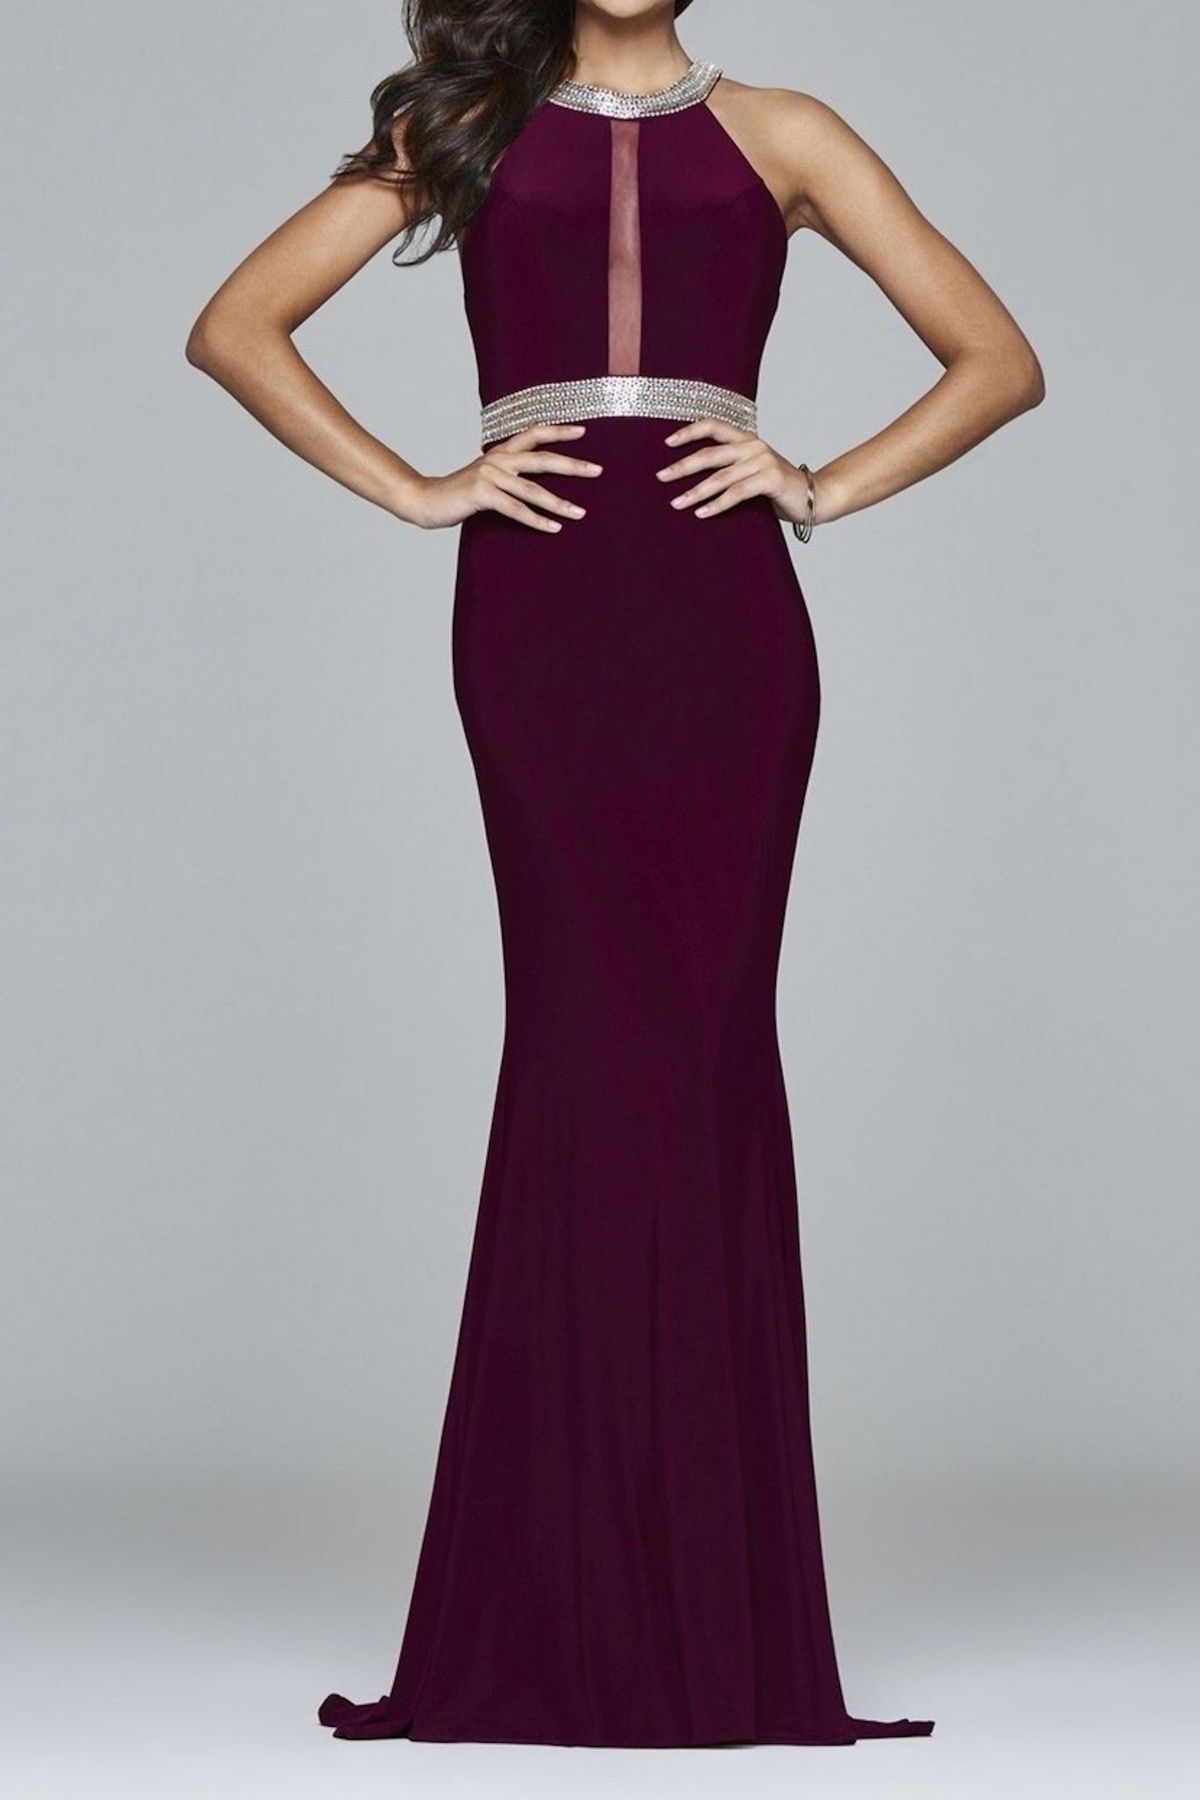 Style 7910 Faviana Size 8 Prom High Neck Sequined Burgundy Red Floor Length Maxi on Queenly